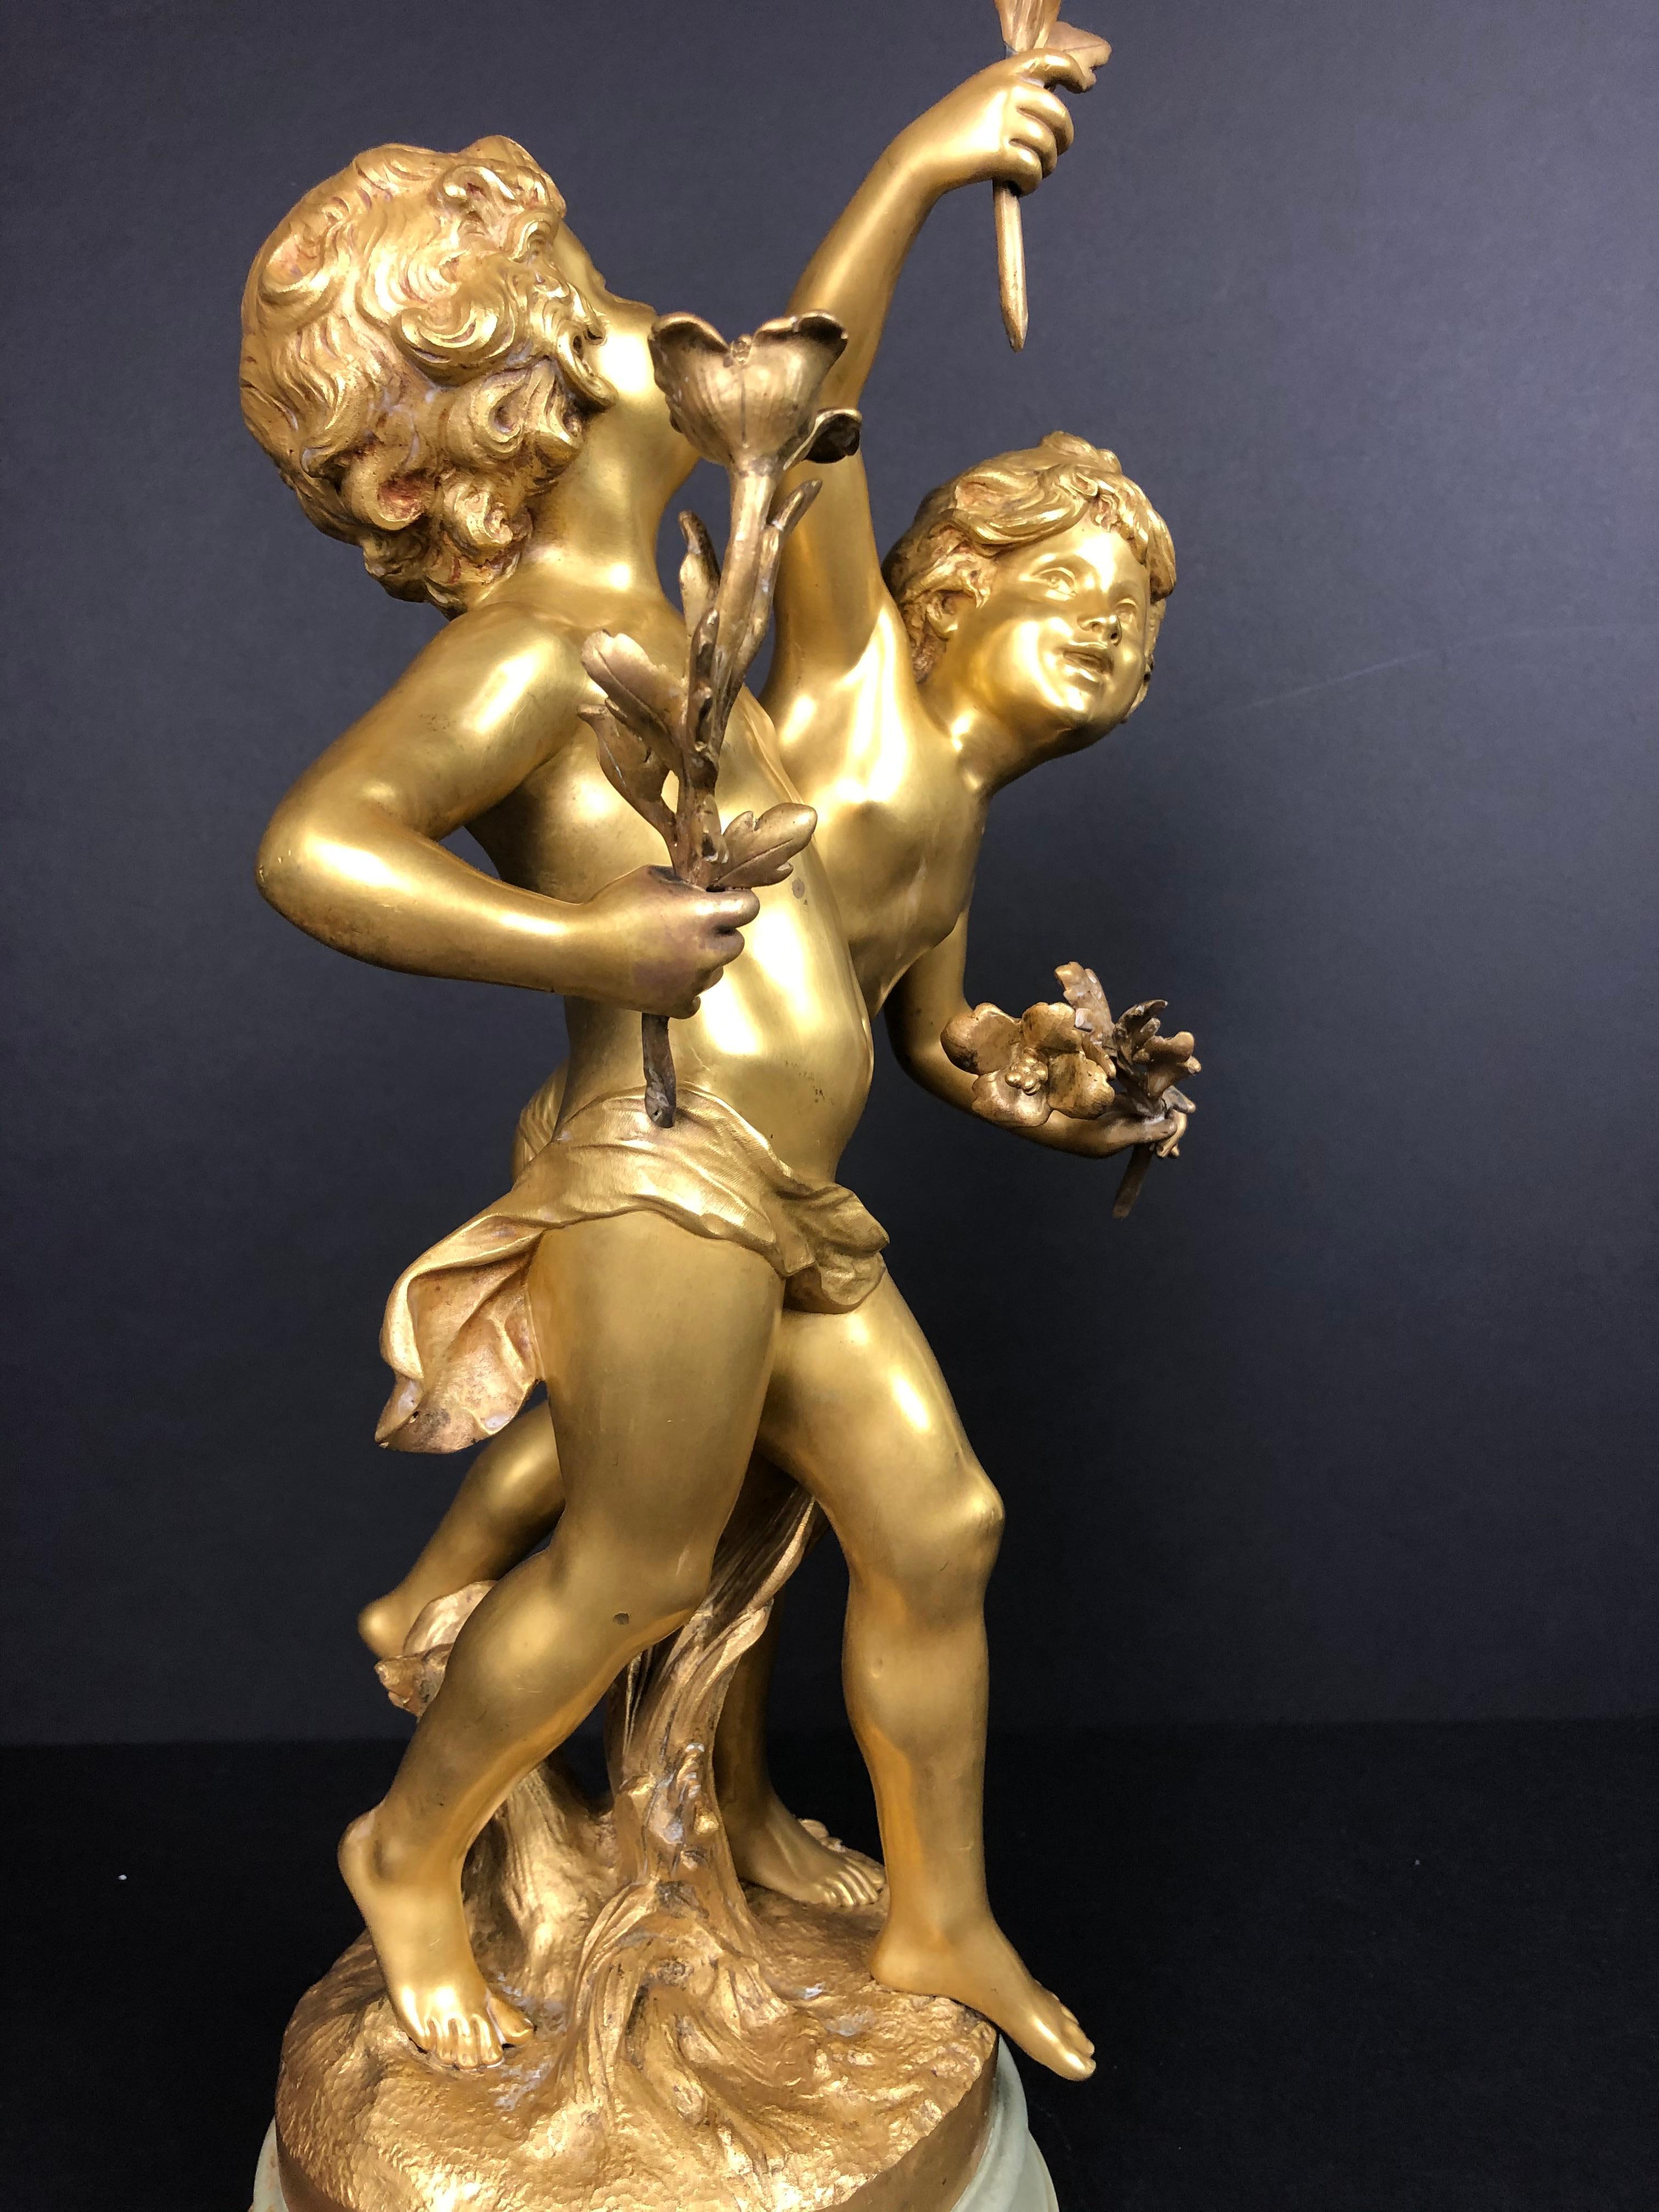 Auguste Moreau doré bronze figural group of children. Original 19th century fine quality doré bronze sculptural group of a young boy and girl presenting flowers. Mounted on marble base with doré bronze ring at bottom. Signed on base.
Diameter of